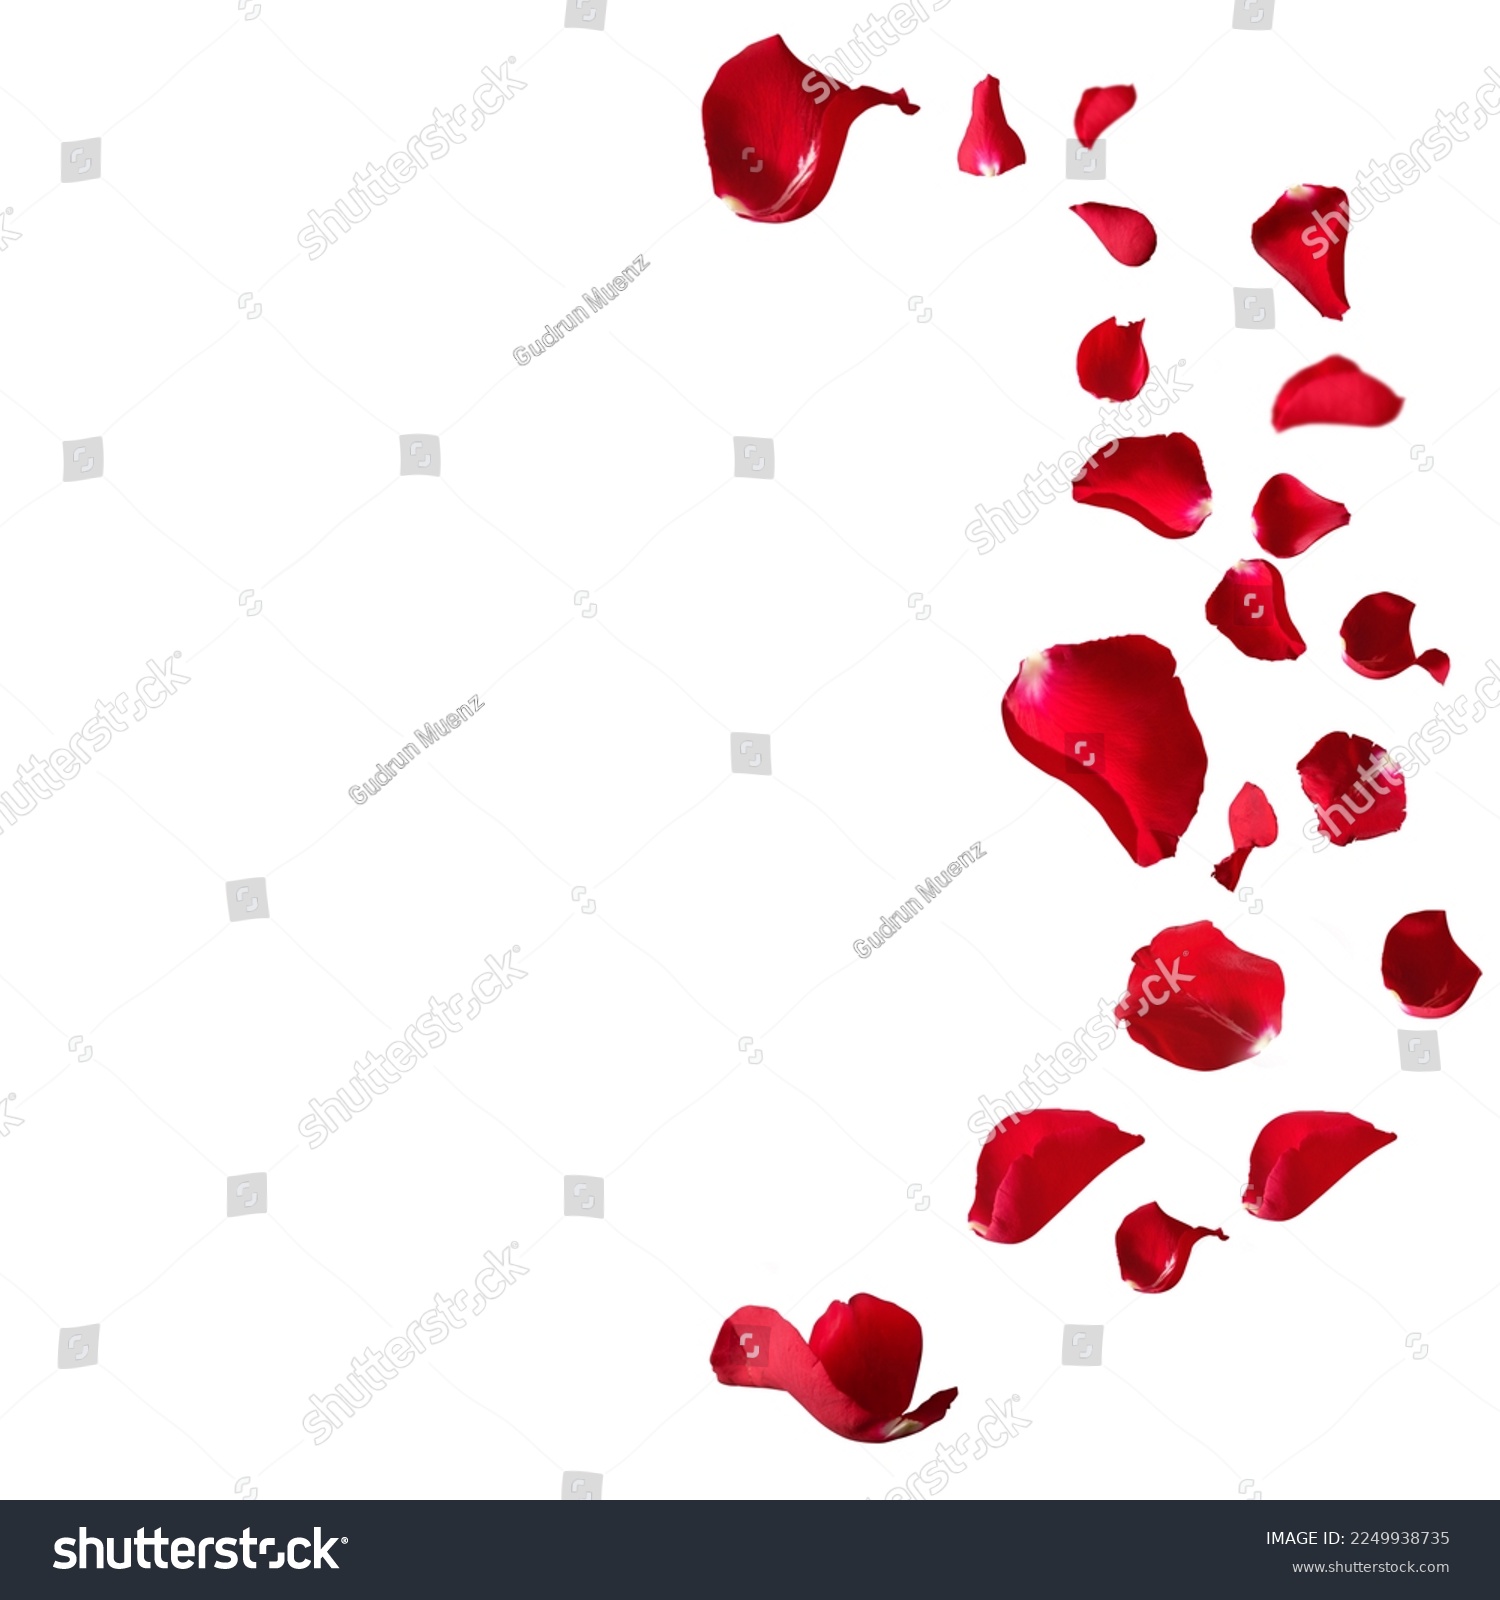 Red rose petals isolated on white background. Decorated for love greetings on valentines day or wedding. pngd.e. #2249938735